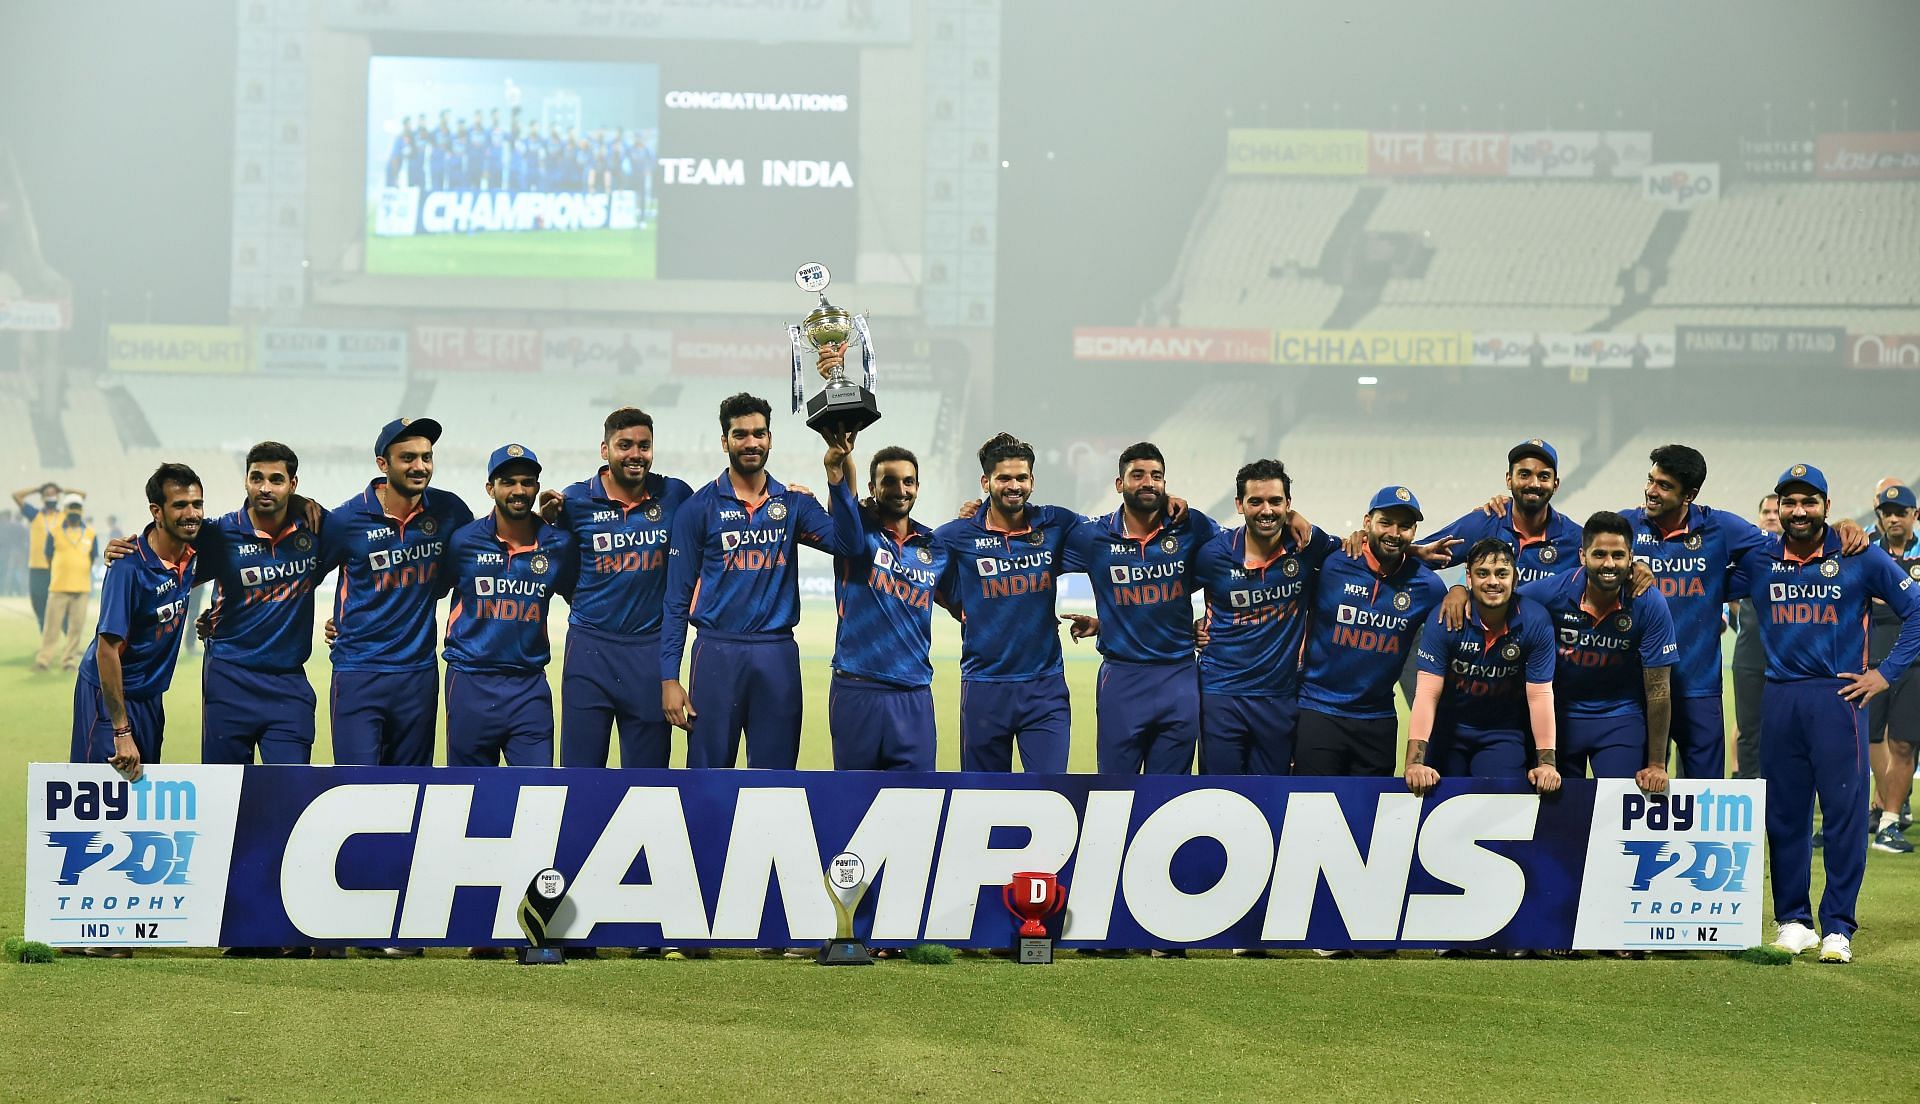 Team India executed a whitewash over New Zealand in the T20I series